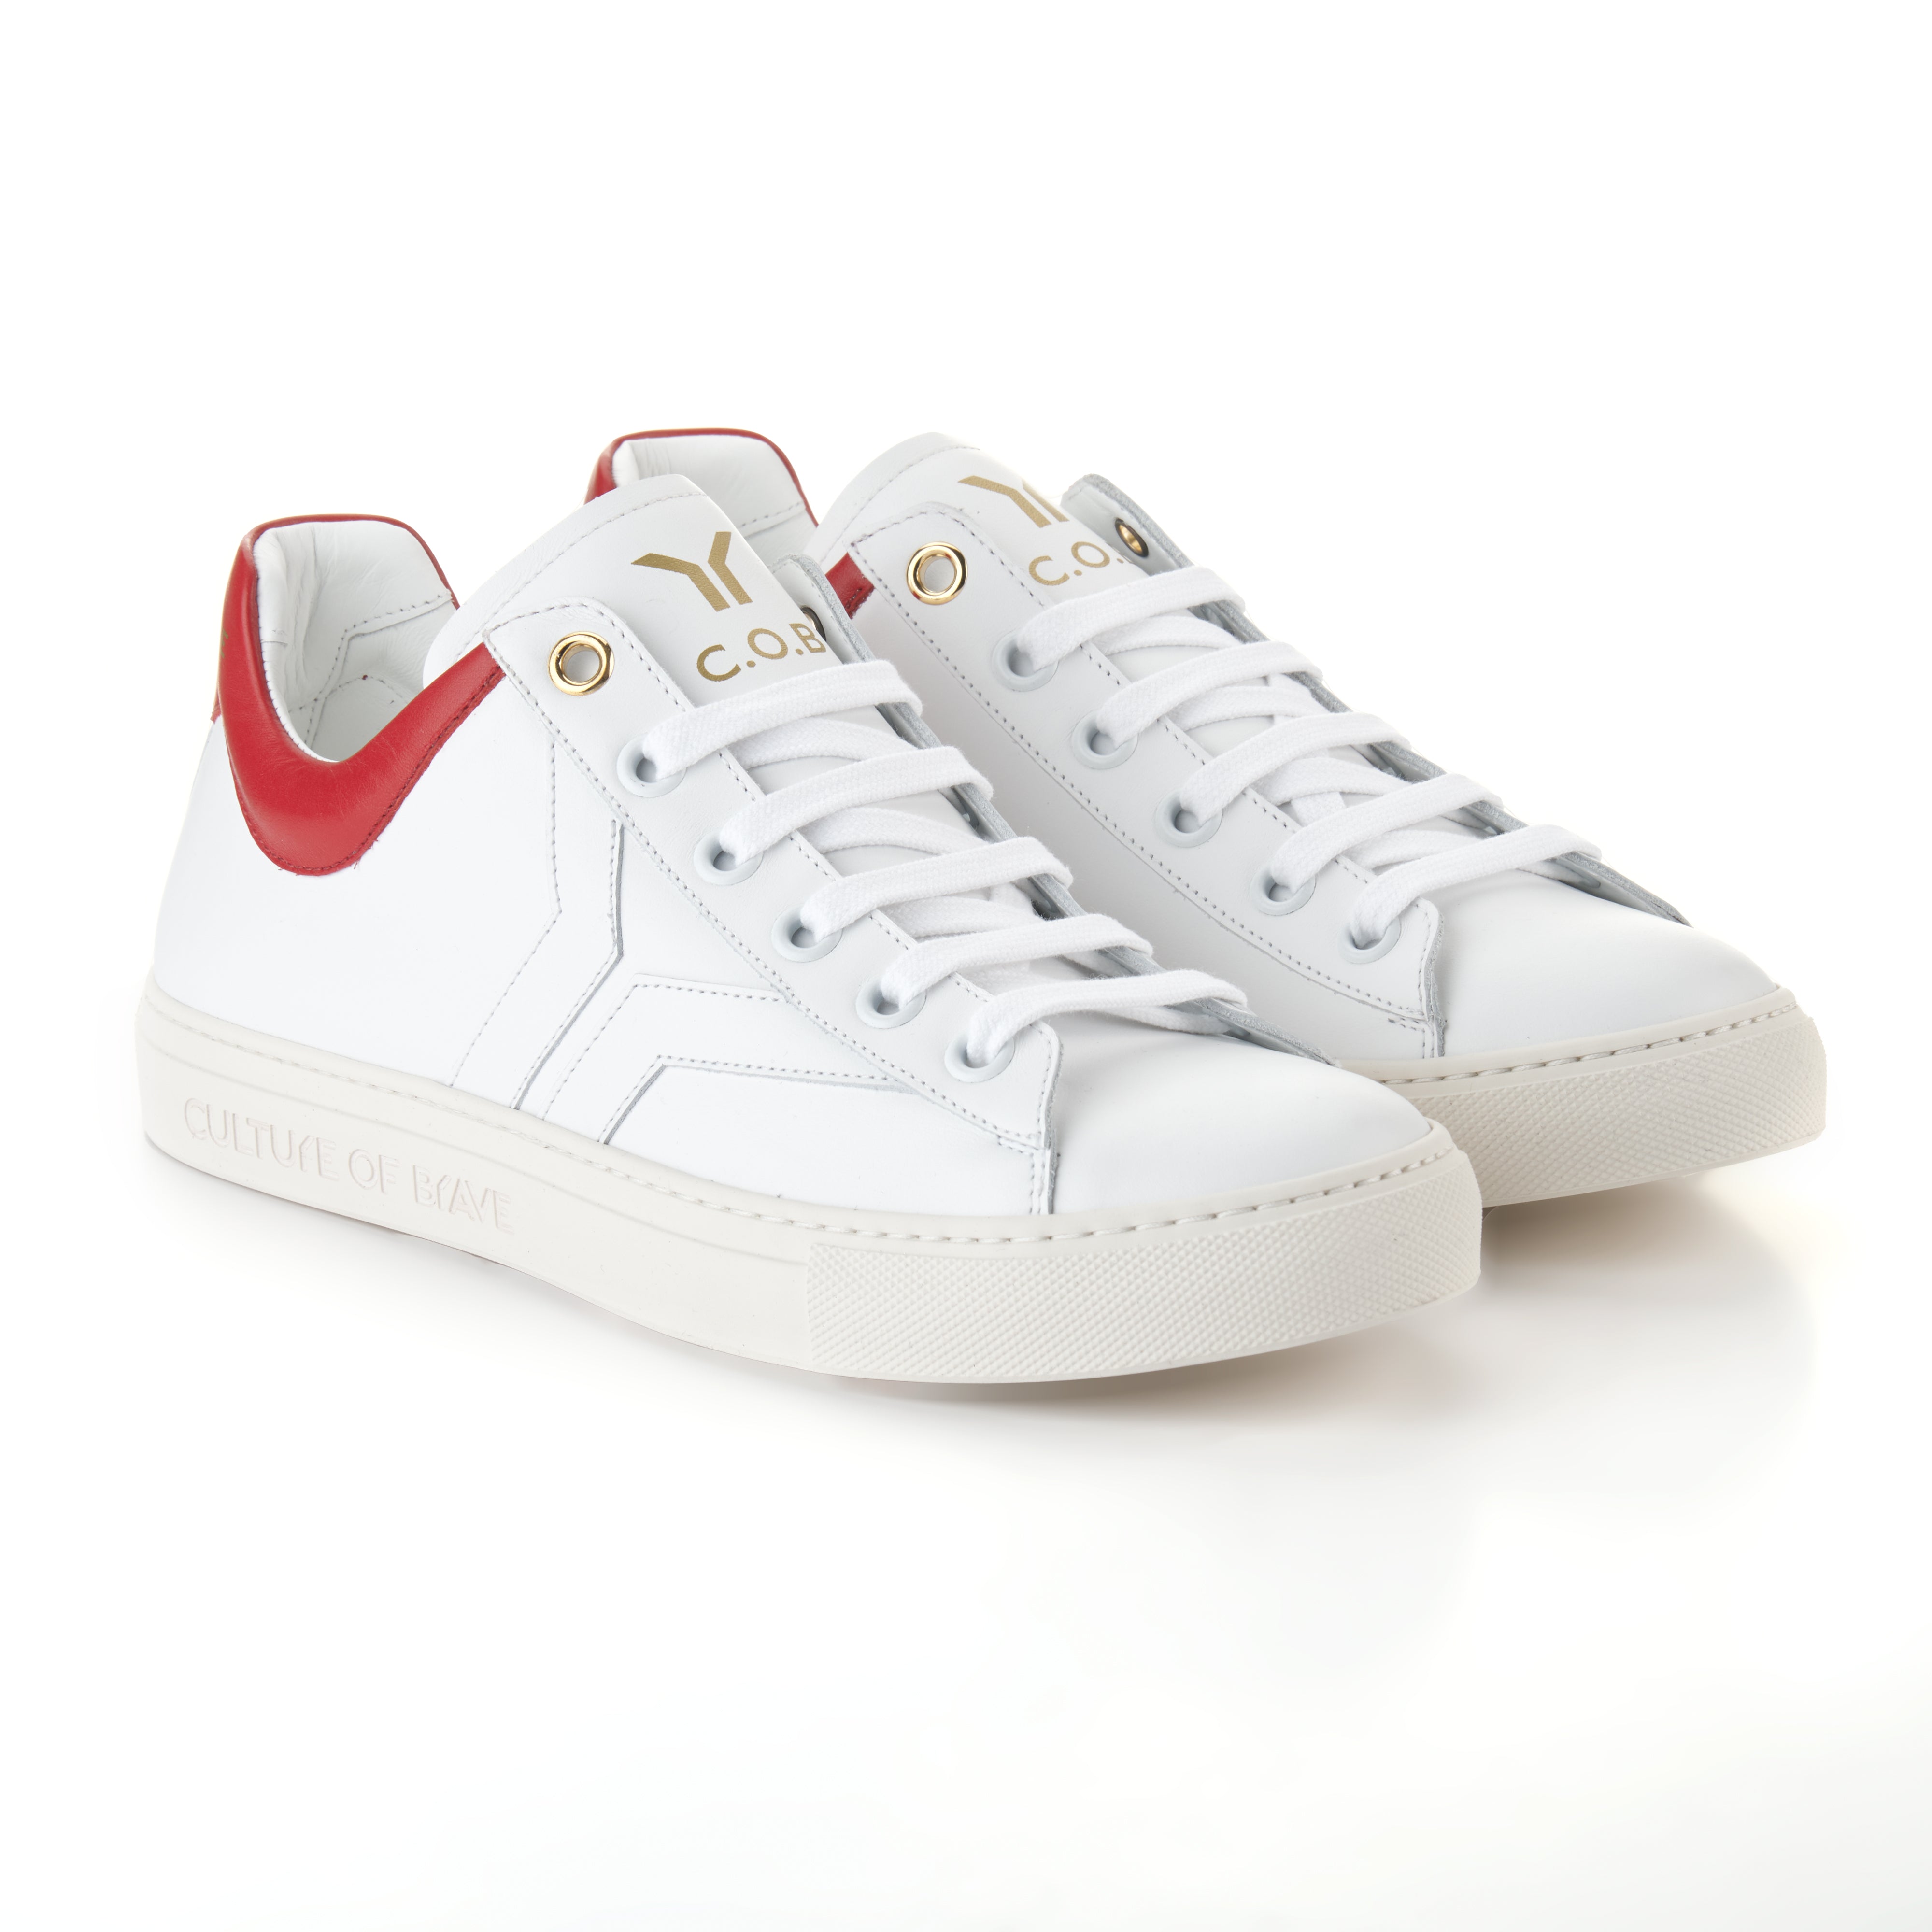 Courage S28 Men White leather red ankle low cut